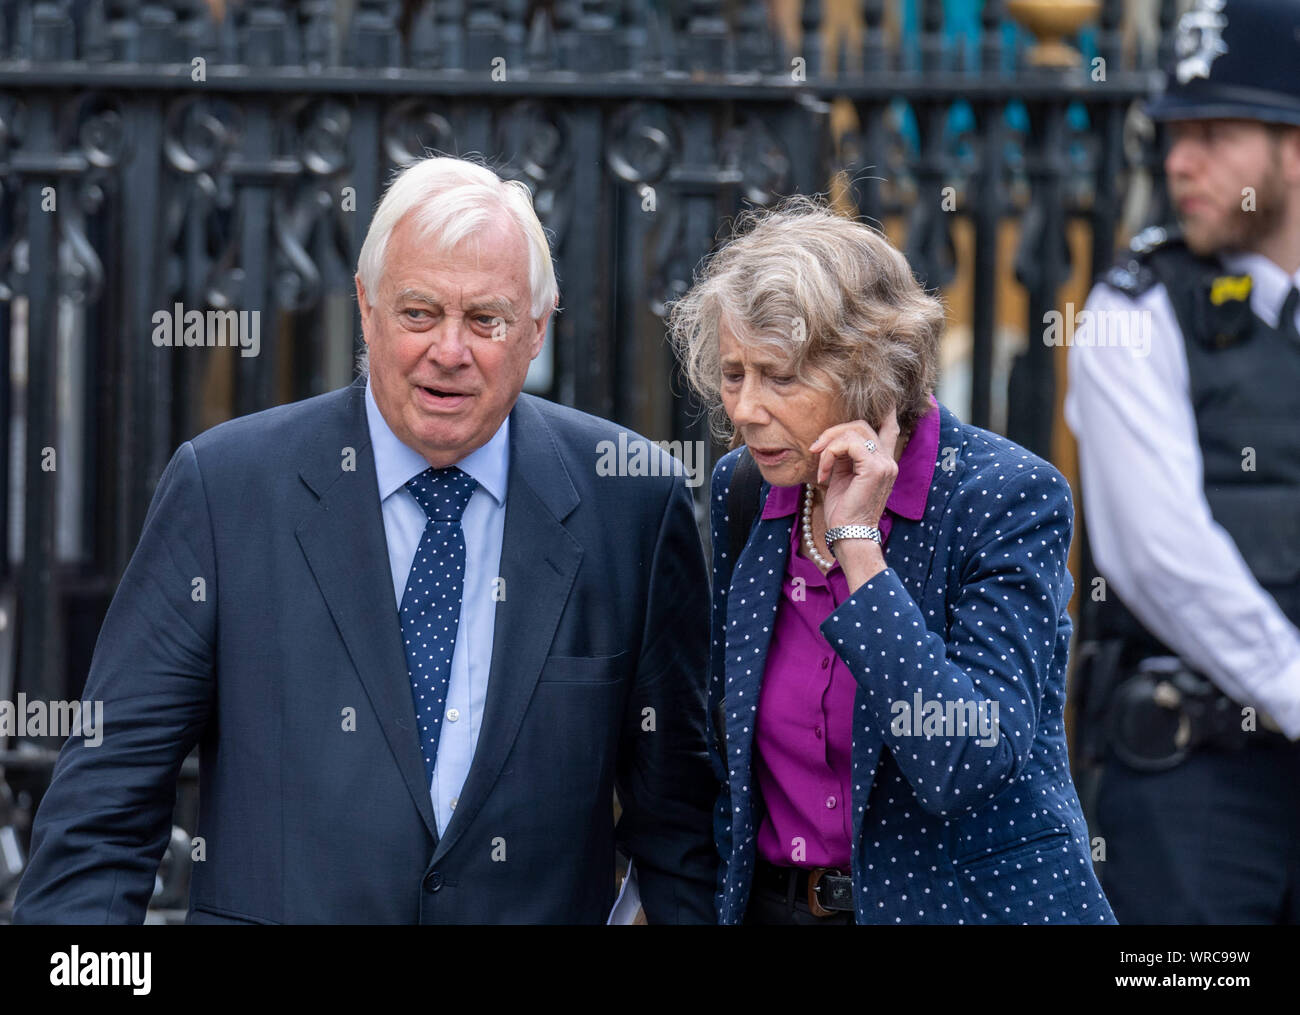 London UK 10th September 2019 Lord Chris Patten (former Governor of Hong Kong)  at Westminster Abbey for the memorial service for Paddy Ashdown Credit Ian DavidsonAlamy Live News Stock Photo